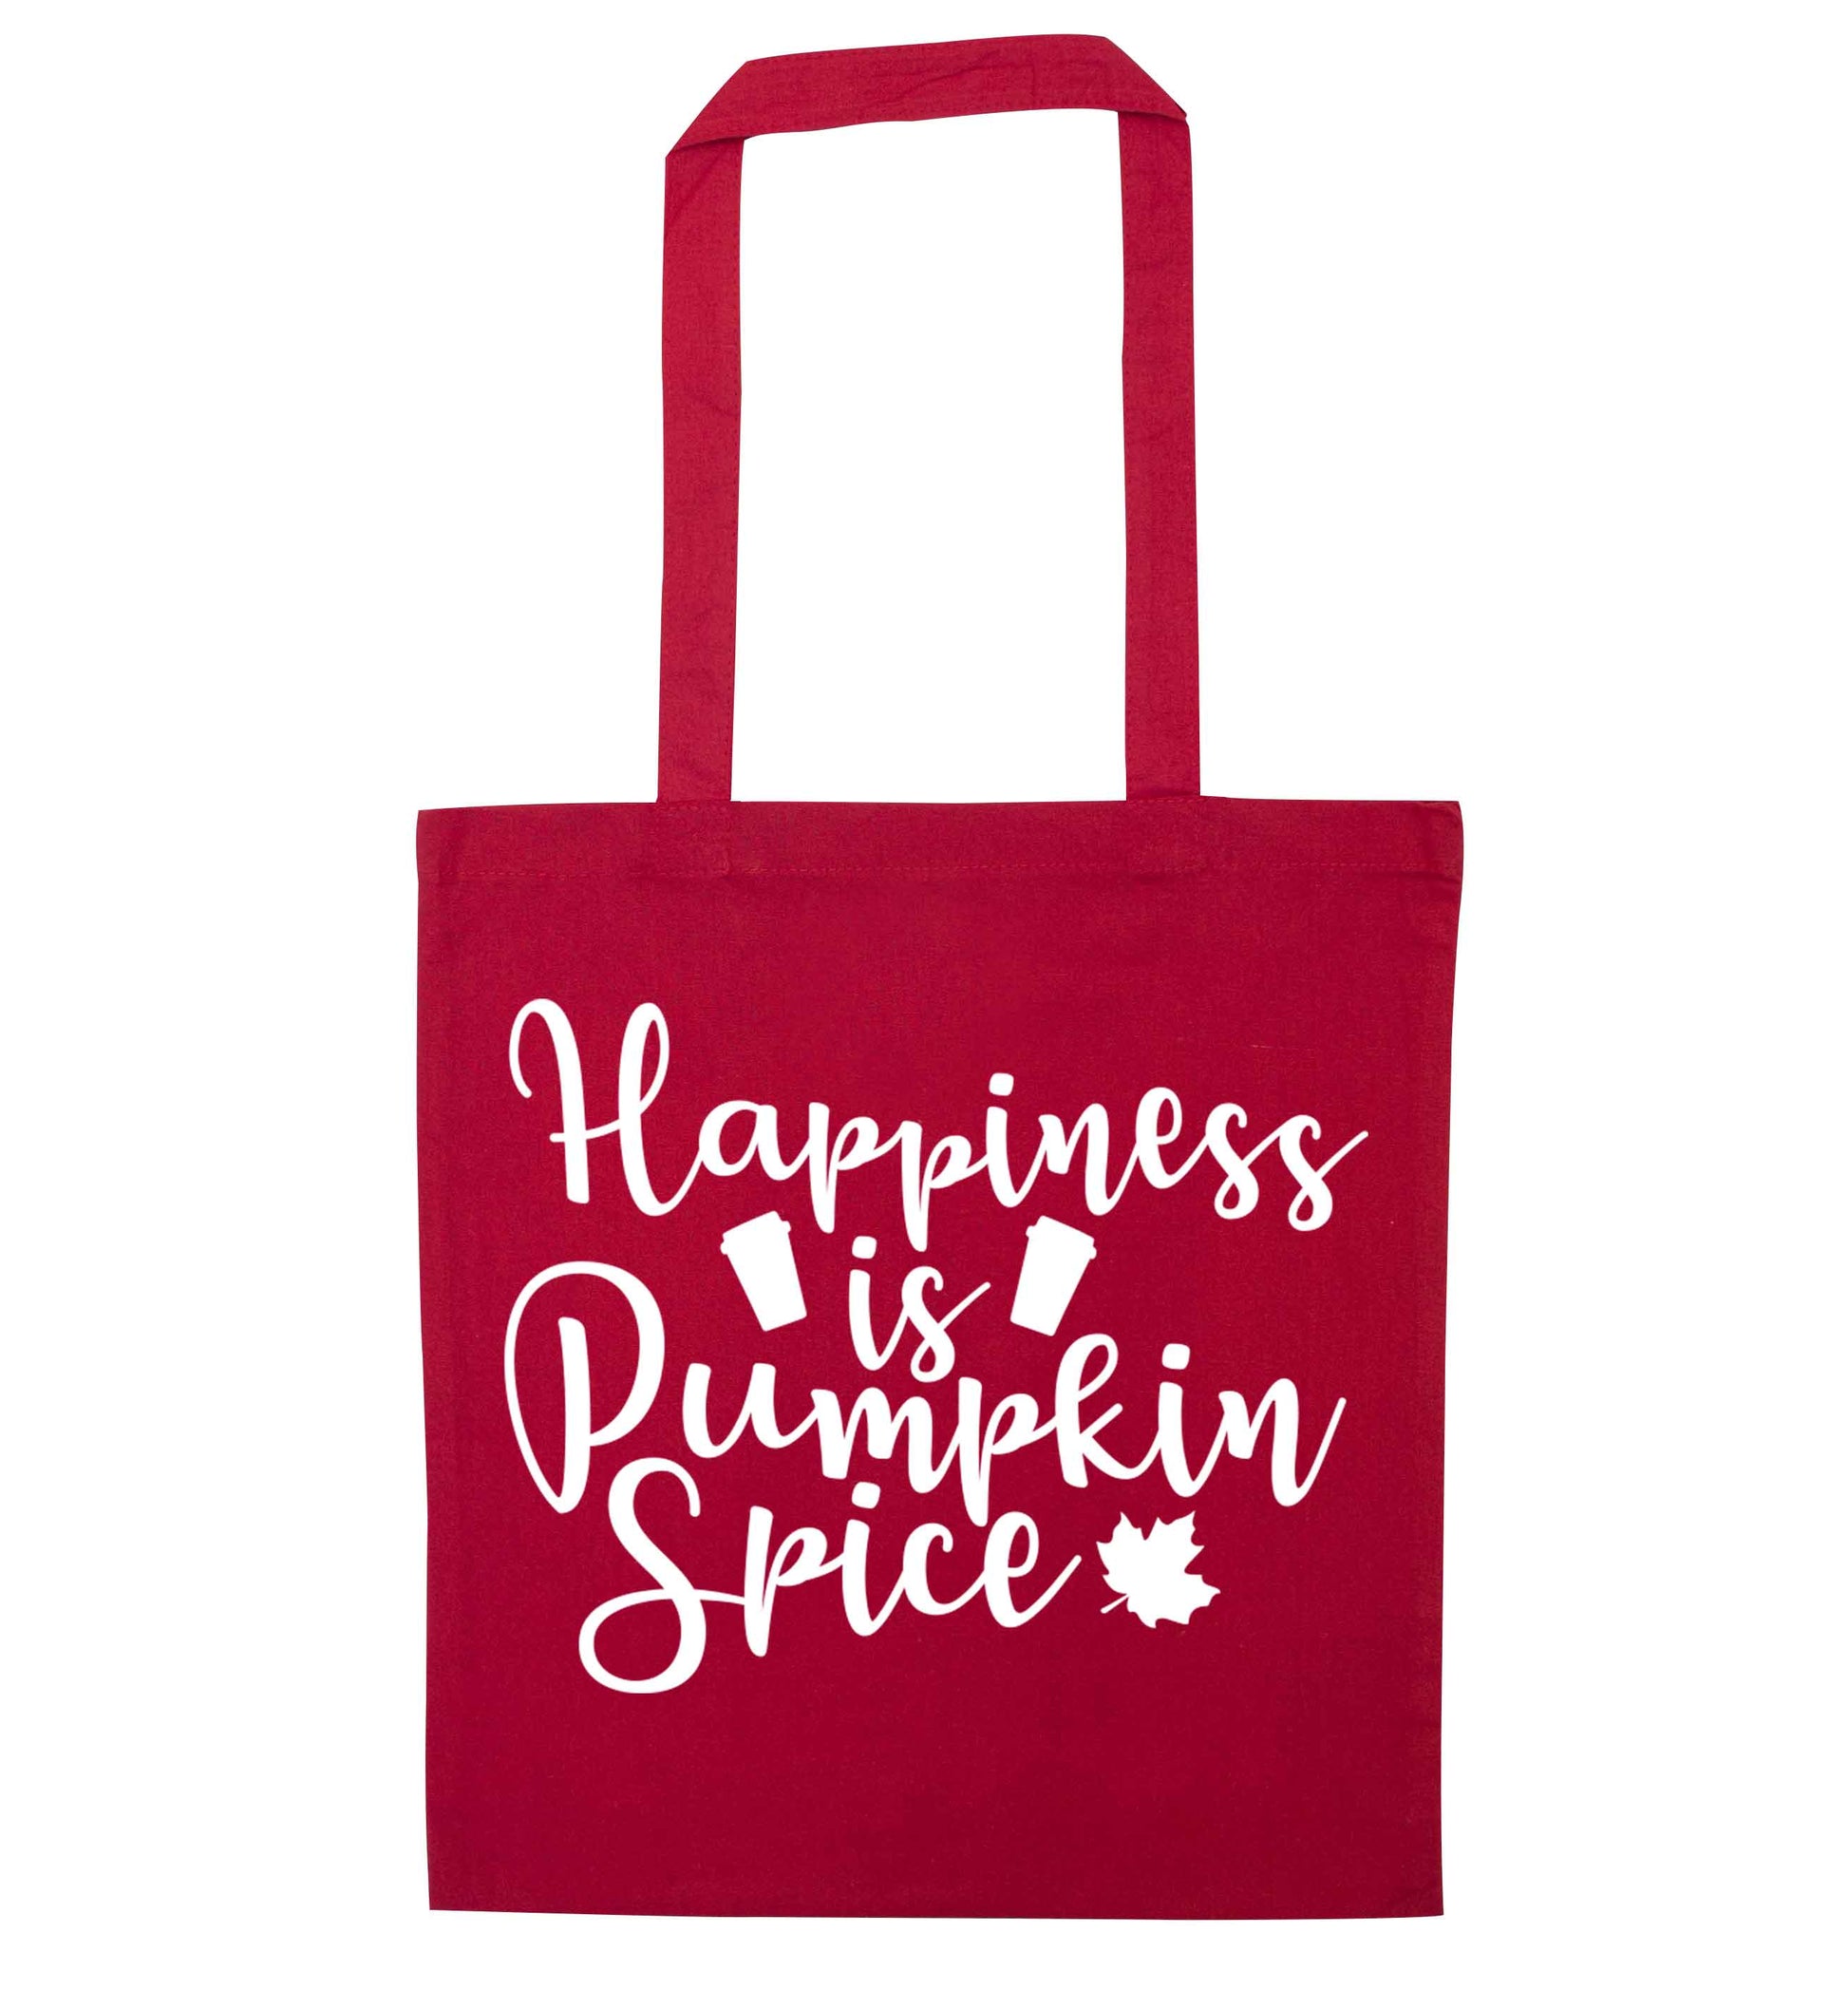 Happiness Pumpkin Spice red tote bag